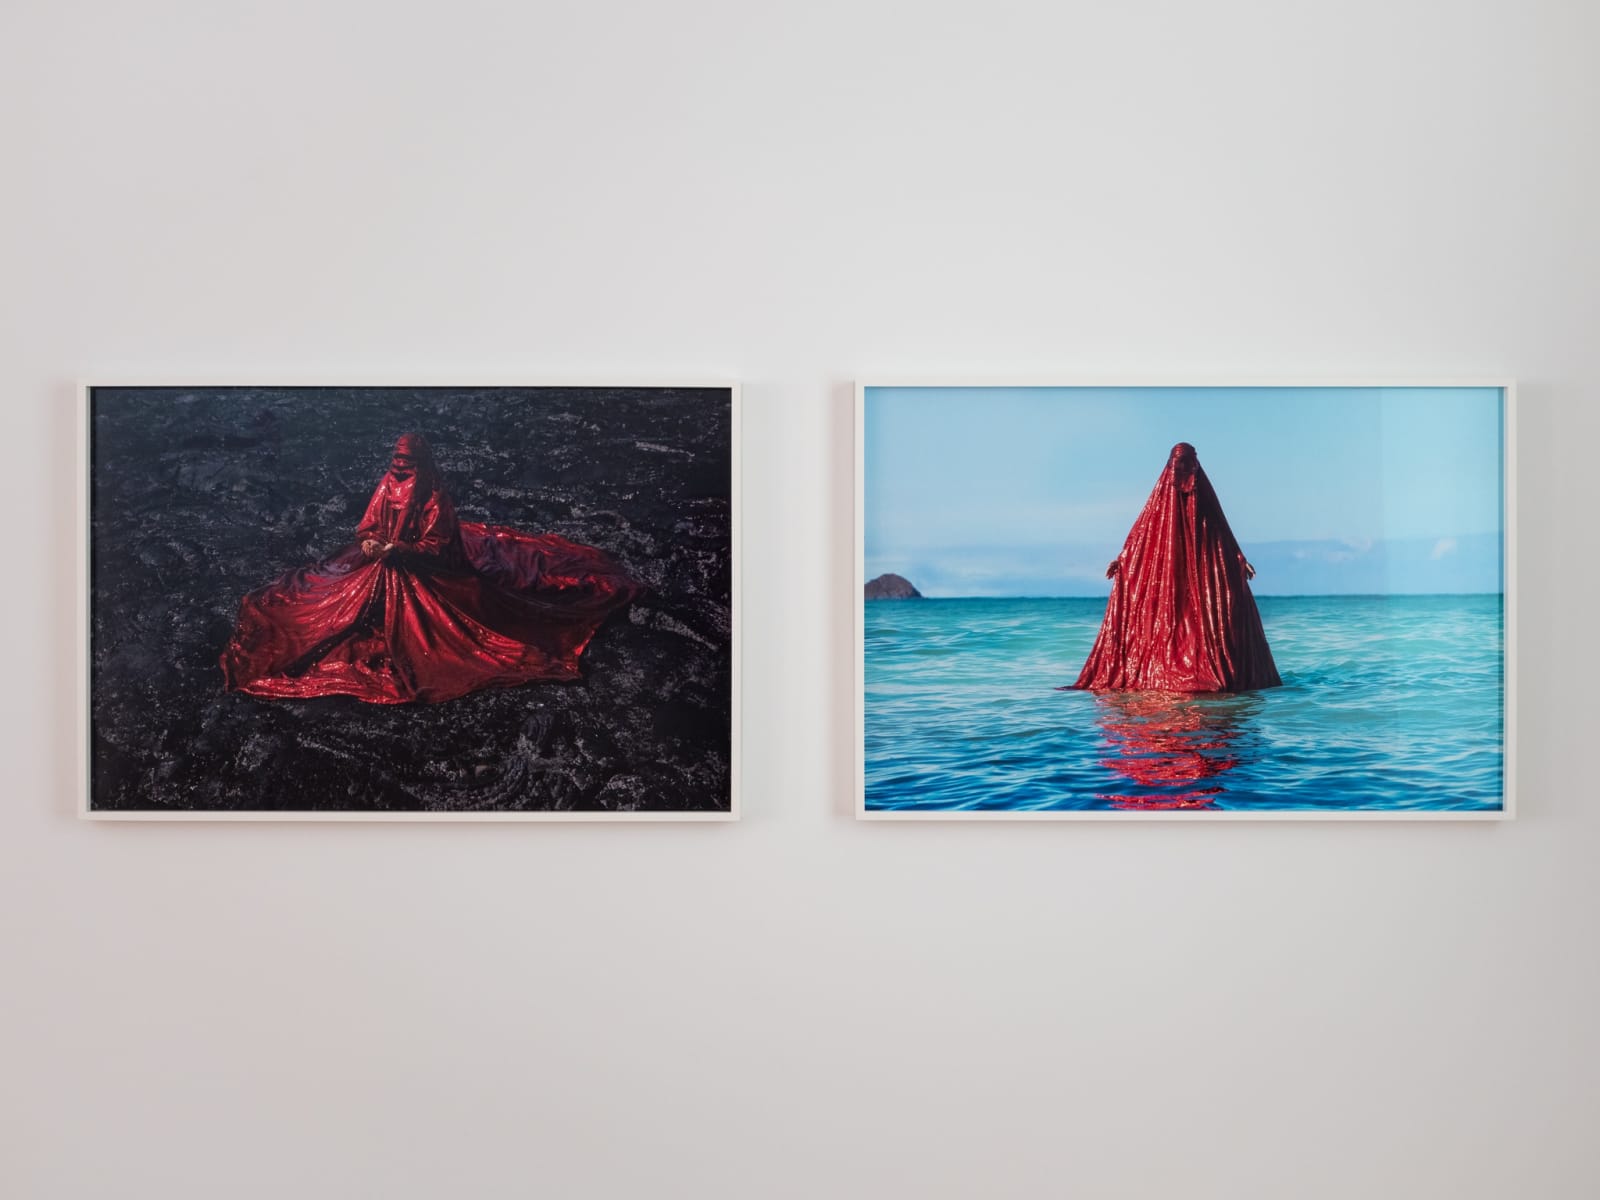 Anida Yoeu Ali Lava Rising, The Red Chador: Genesis I , 2019 Digital Color Print with Archival Pigment Ink Paper: 75 x 112.5cm Frame: 78 x 115cm Edition of 3 plus 1 artist's proof Anida Yoeu AliWaterbirth, The Red Chador: Genesis I , 2019 Digital Color Print with Archival Pigment Ink Paper: 75 x 112.5cm Frame: 78 x 115cm Edition of 3 plus 1 artist's proof